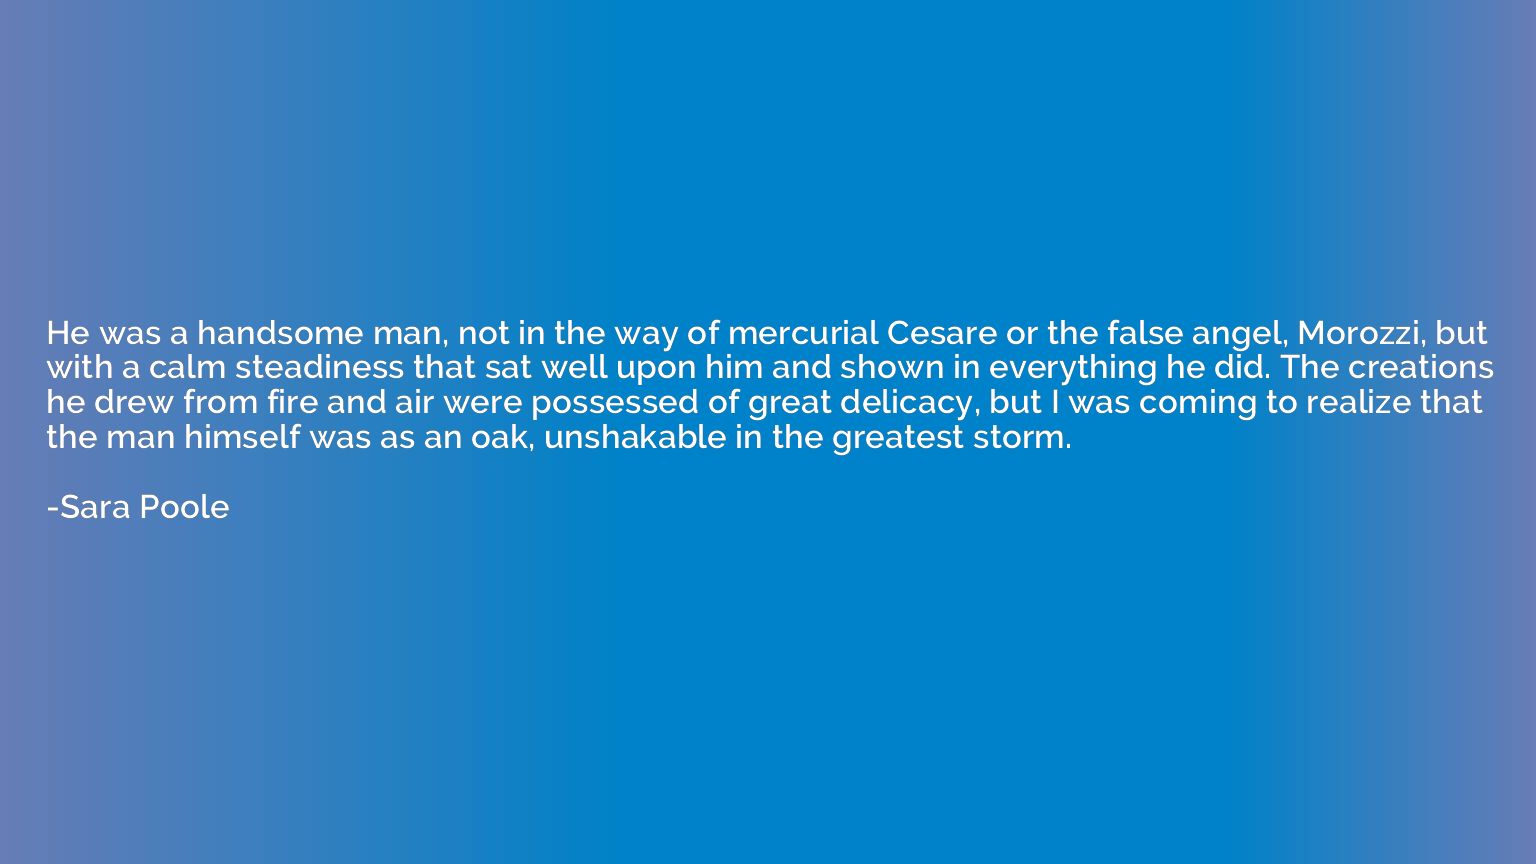 He was a handsome man, not in the way of mercurial Cesare or